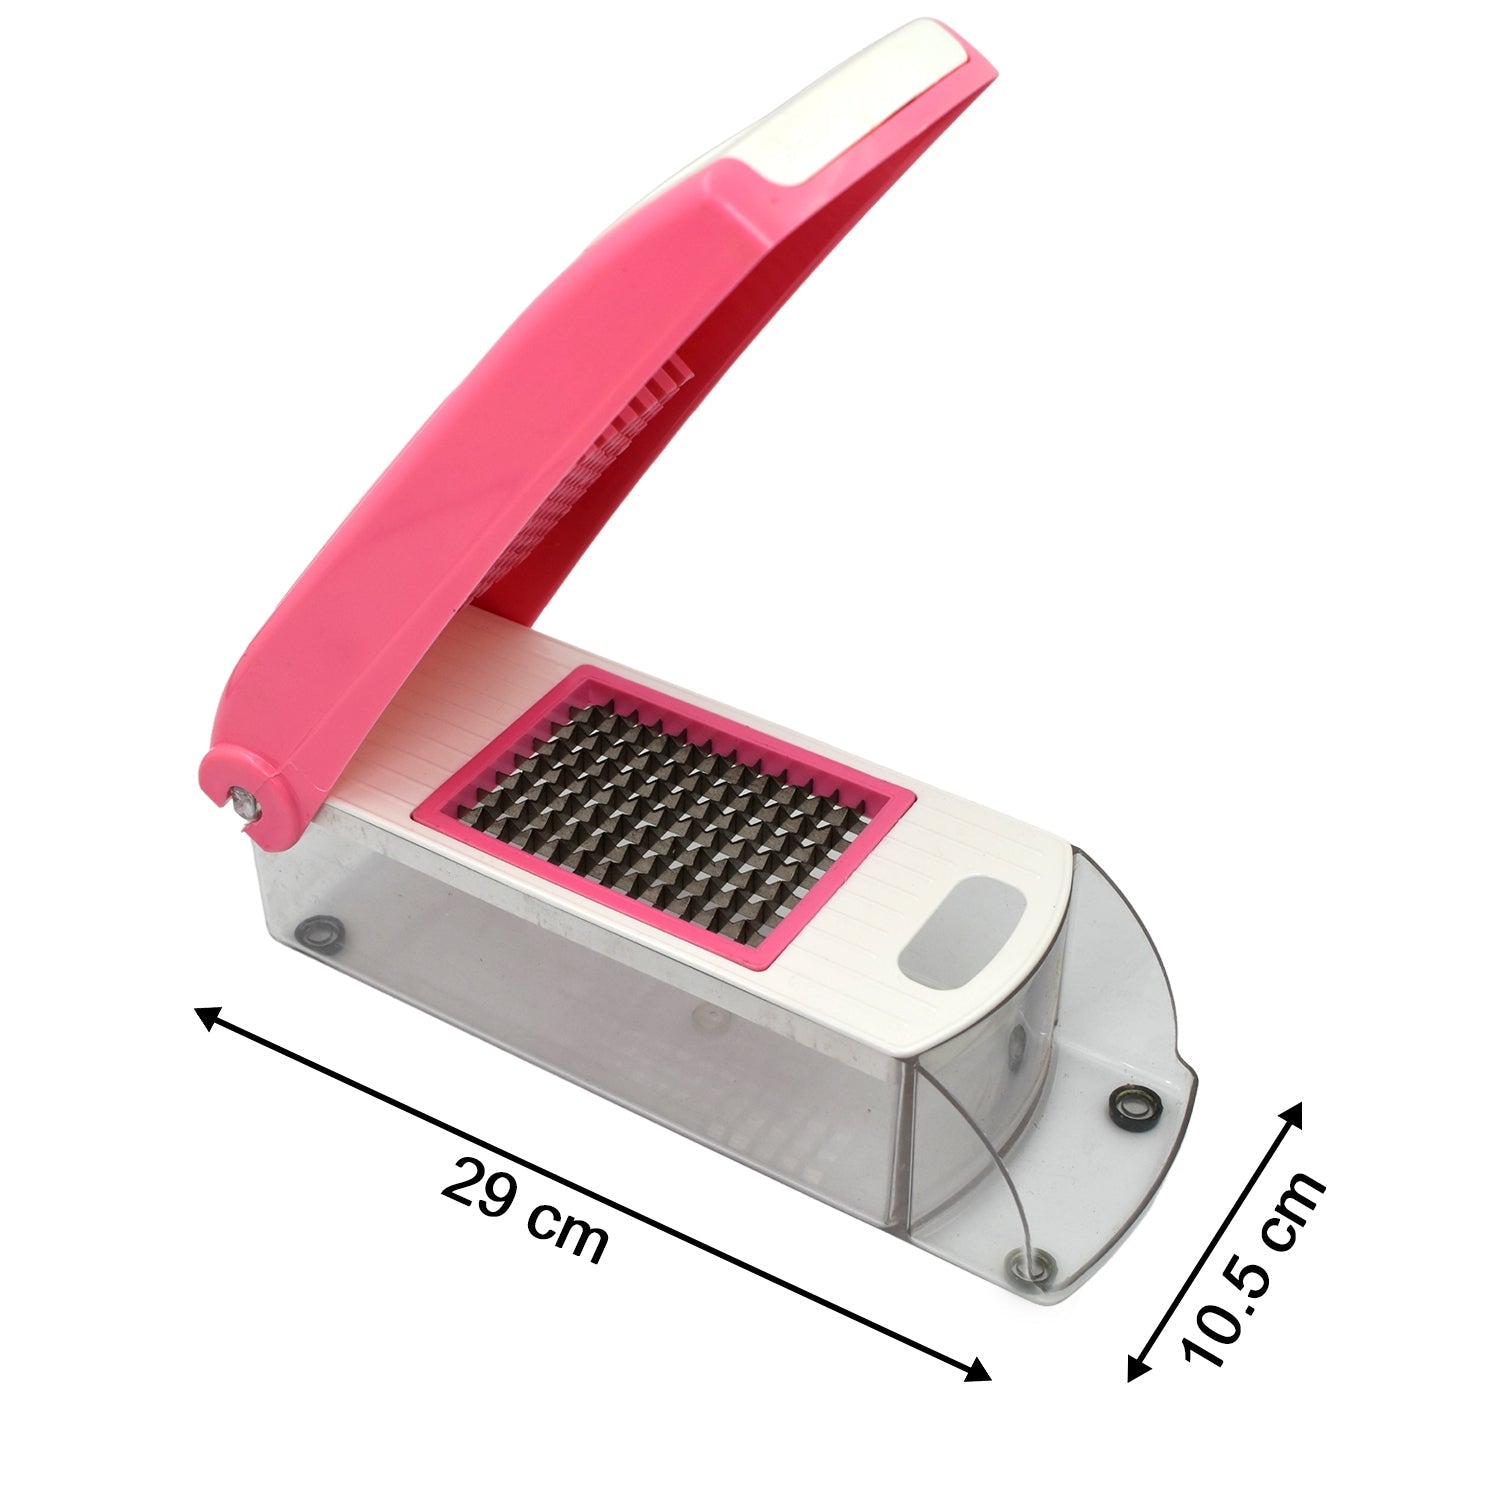 2199B 12In1 Veg Cutter Used To Cut Vegetables Easily In All Kinds Of Places. DeoDap